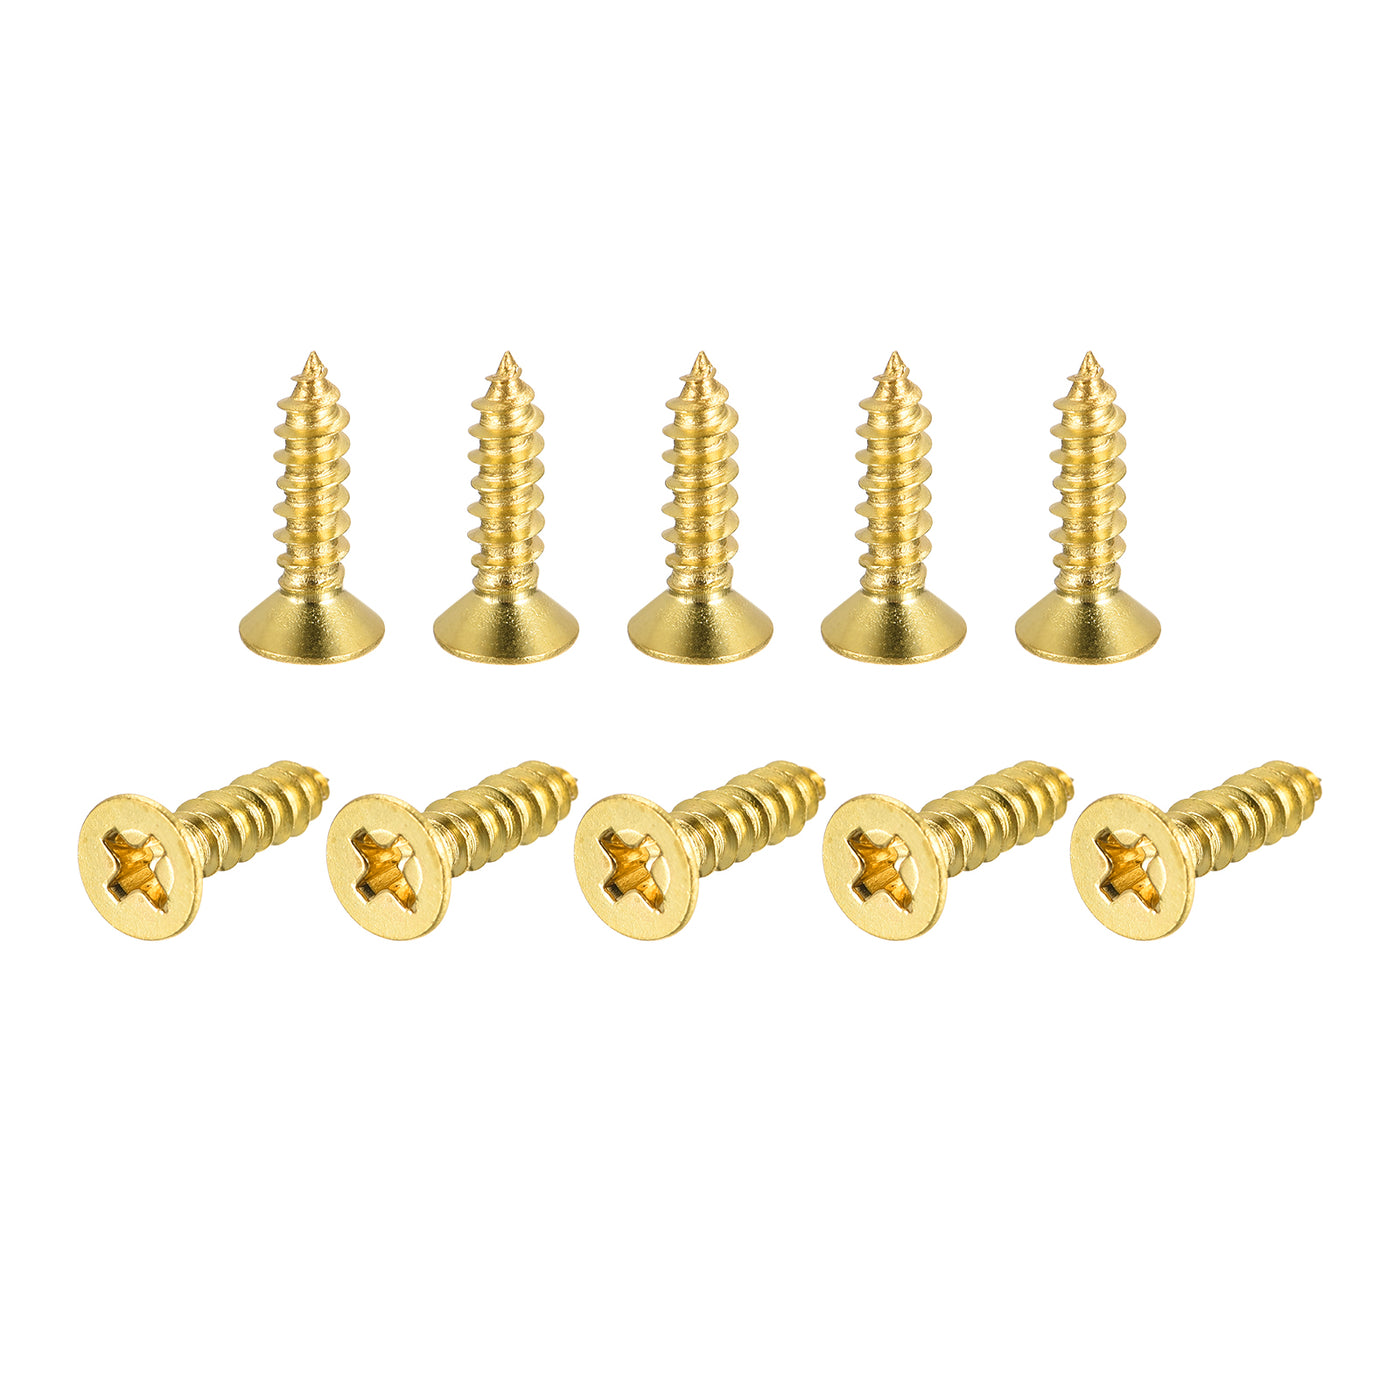 uxcell Uxcell Brass Wood Screws, M4x16mm Phillips Flat Head Self Tapping Connector for Door, Cabinet, Wooden Furniture 50Pcs